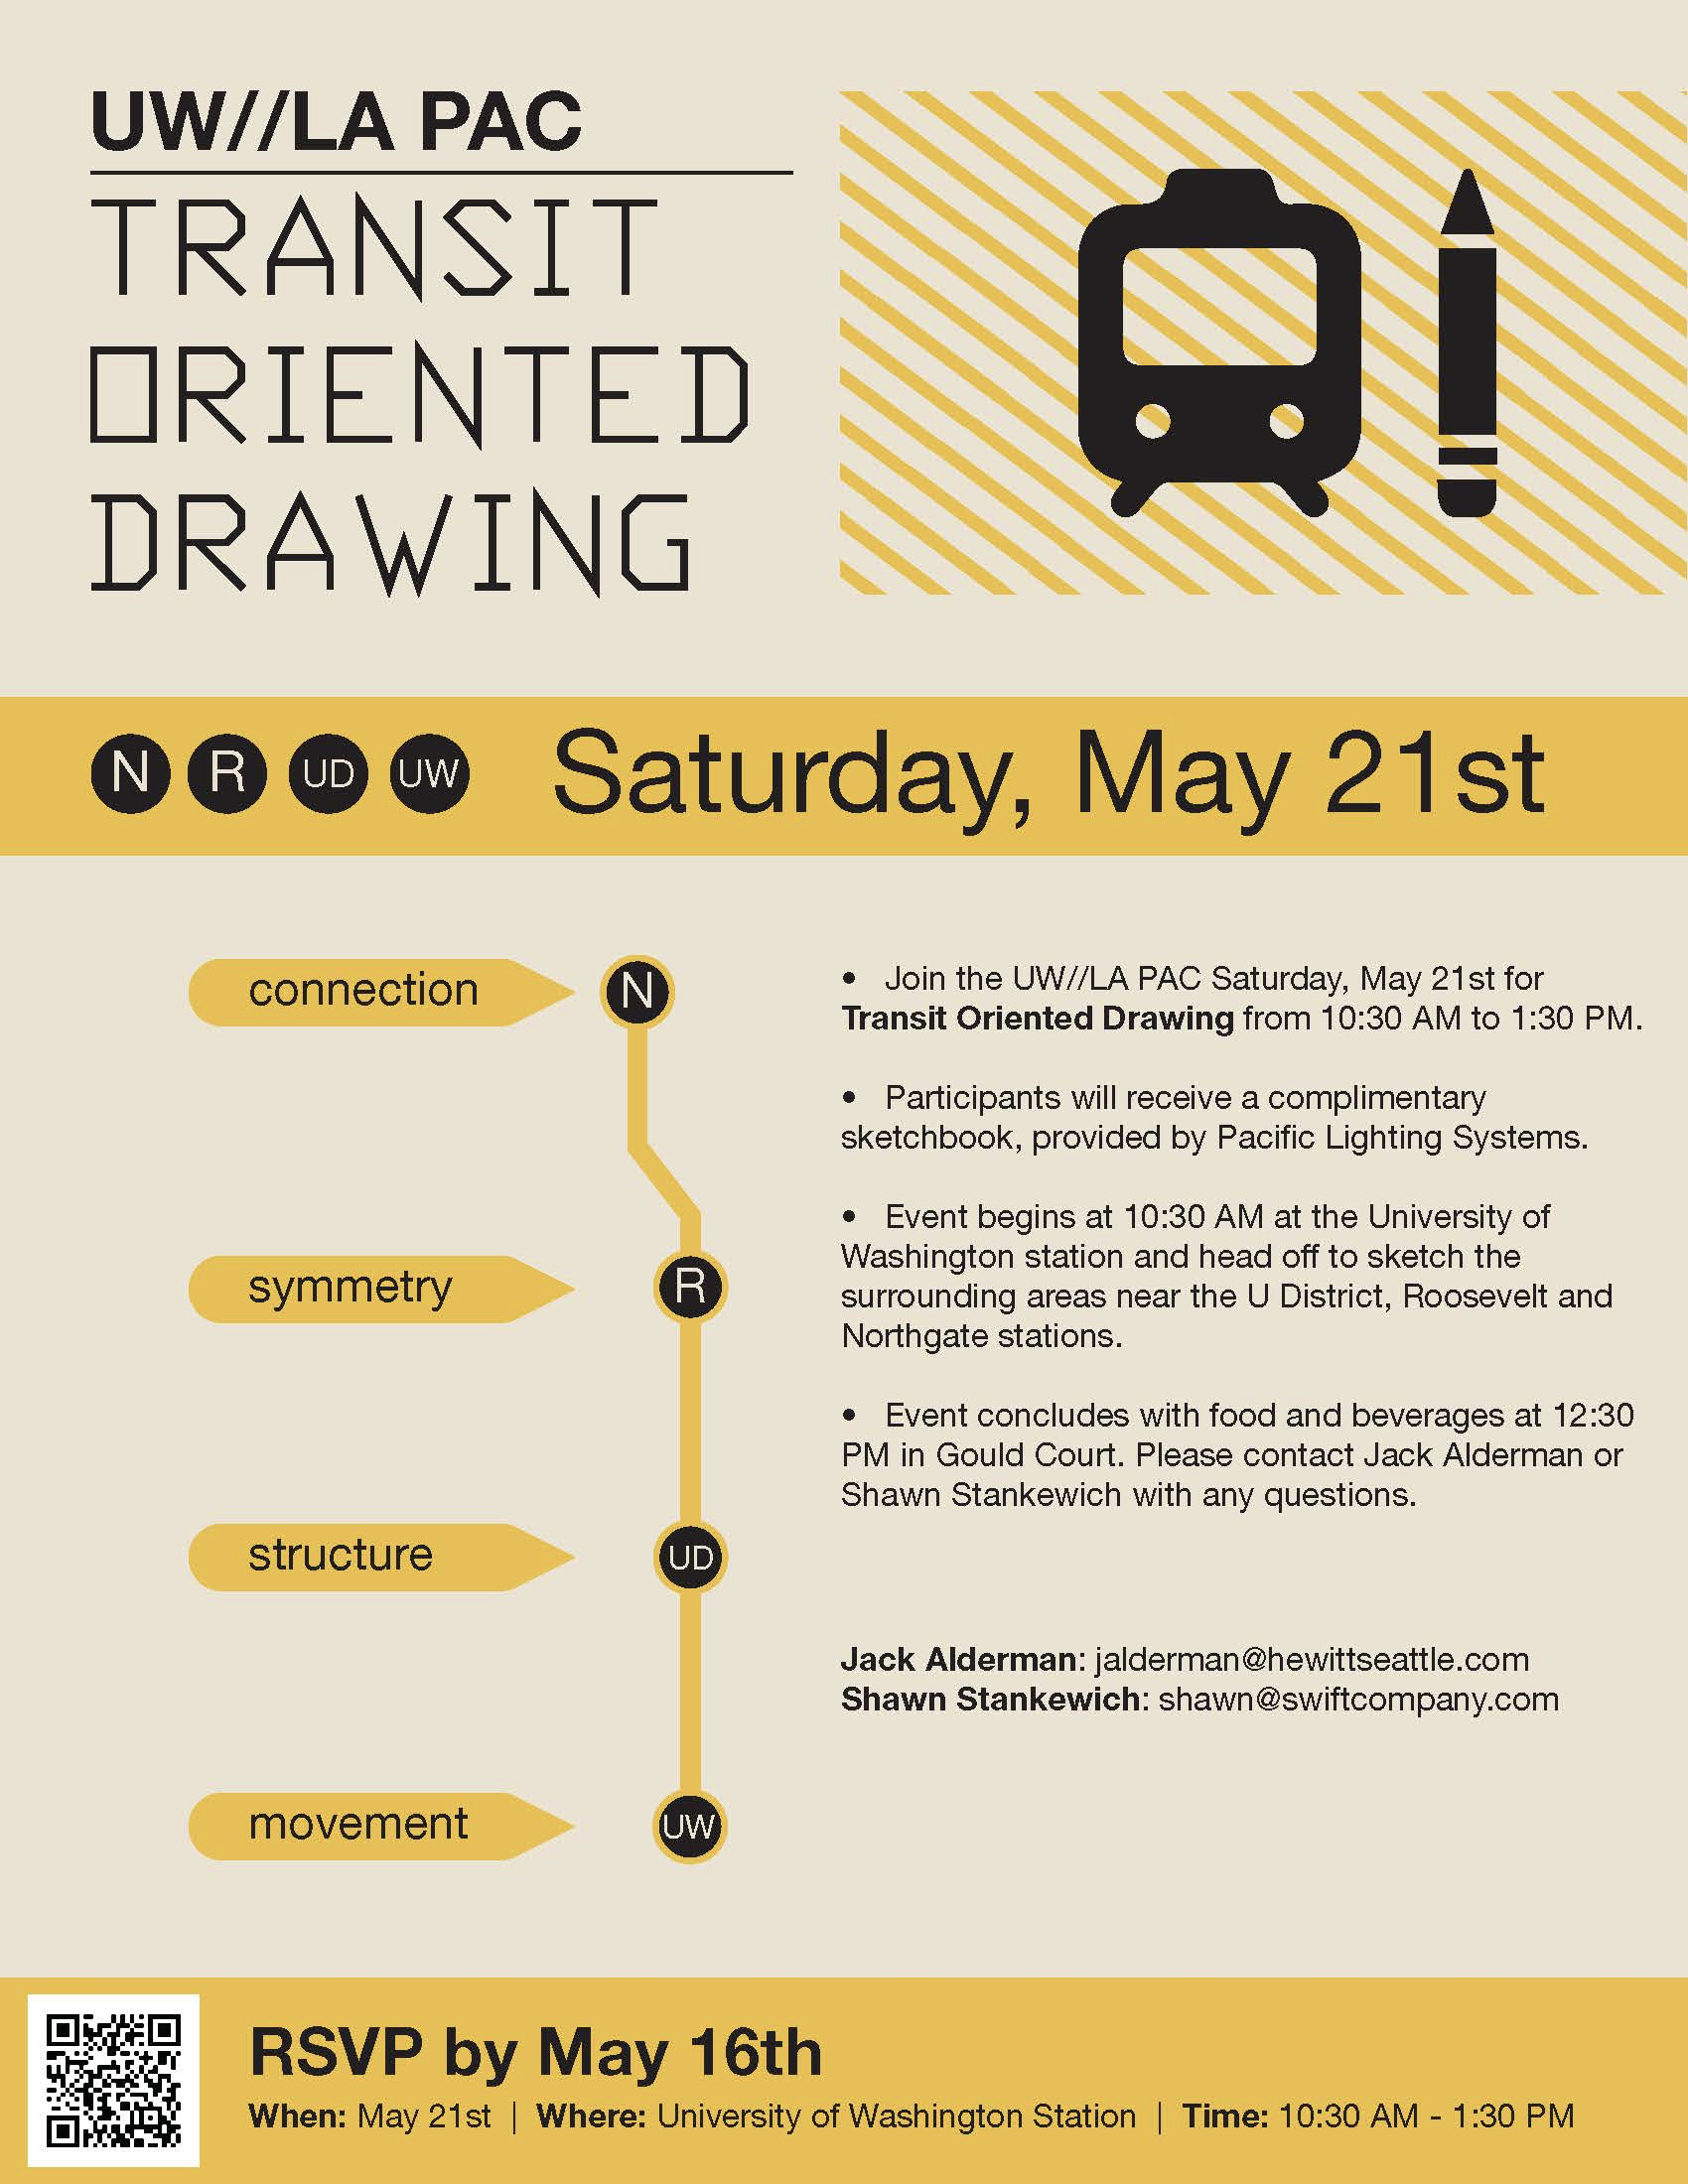 PAC Transit Oriented Drawing (TOD) on Saturday May 21st